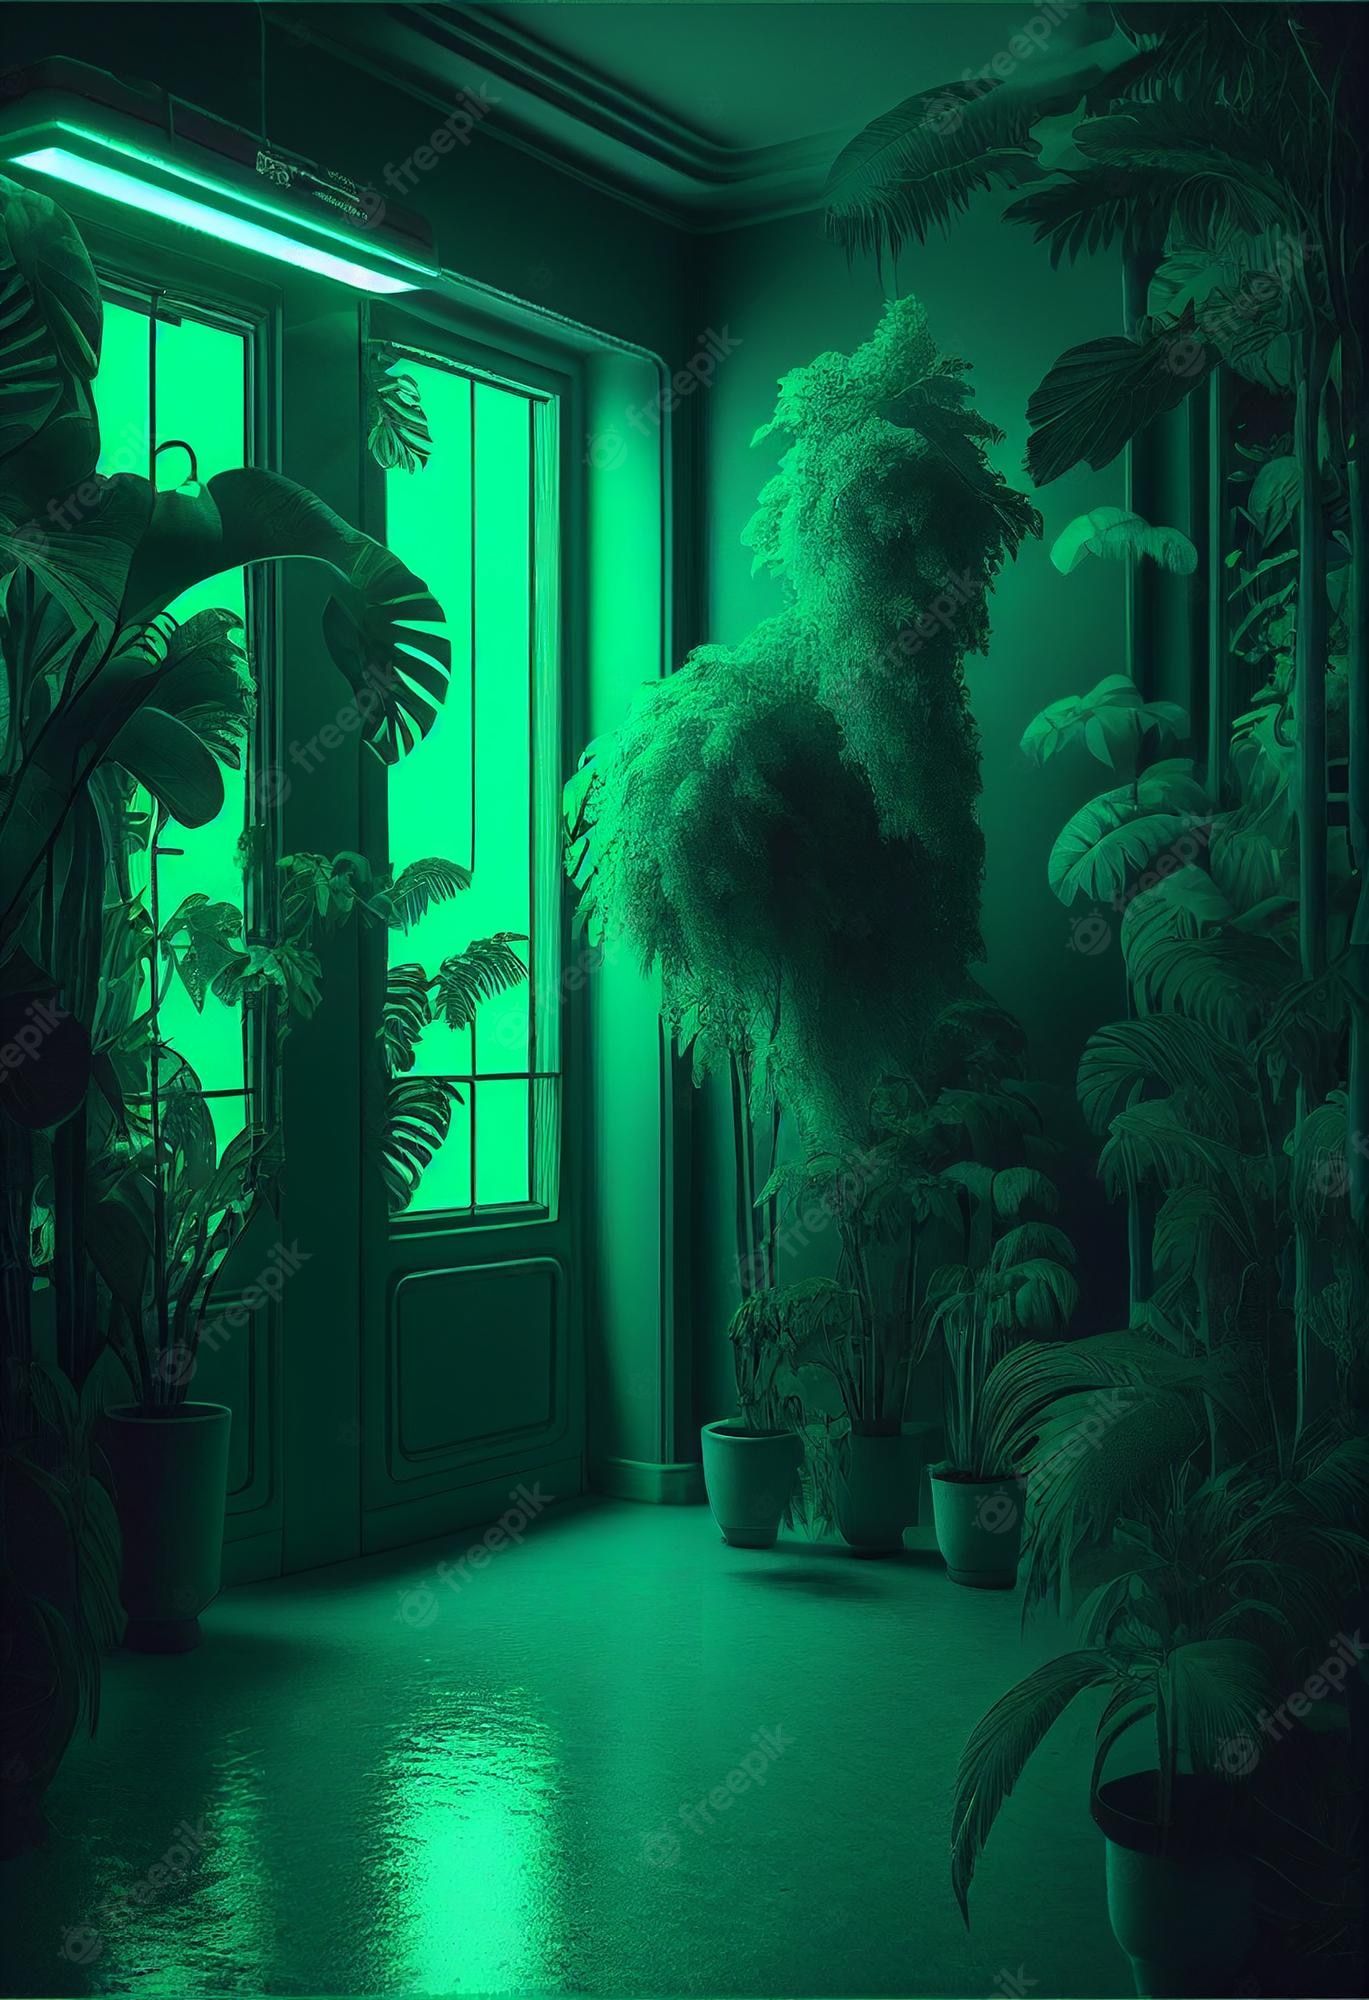 A room with green lighting and plants - Neon green, dark green, lime green